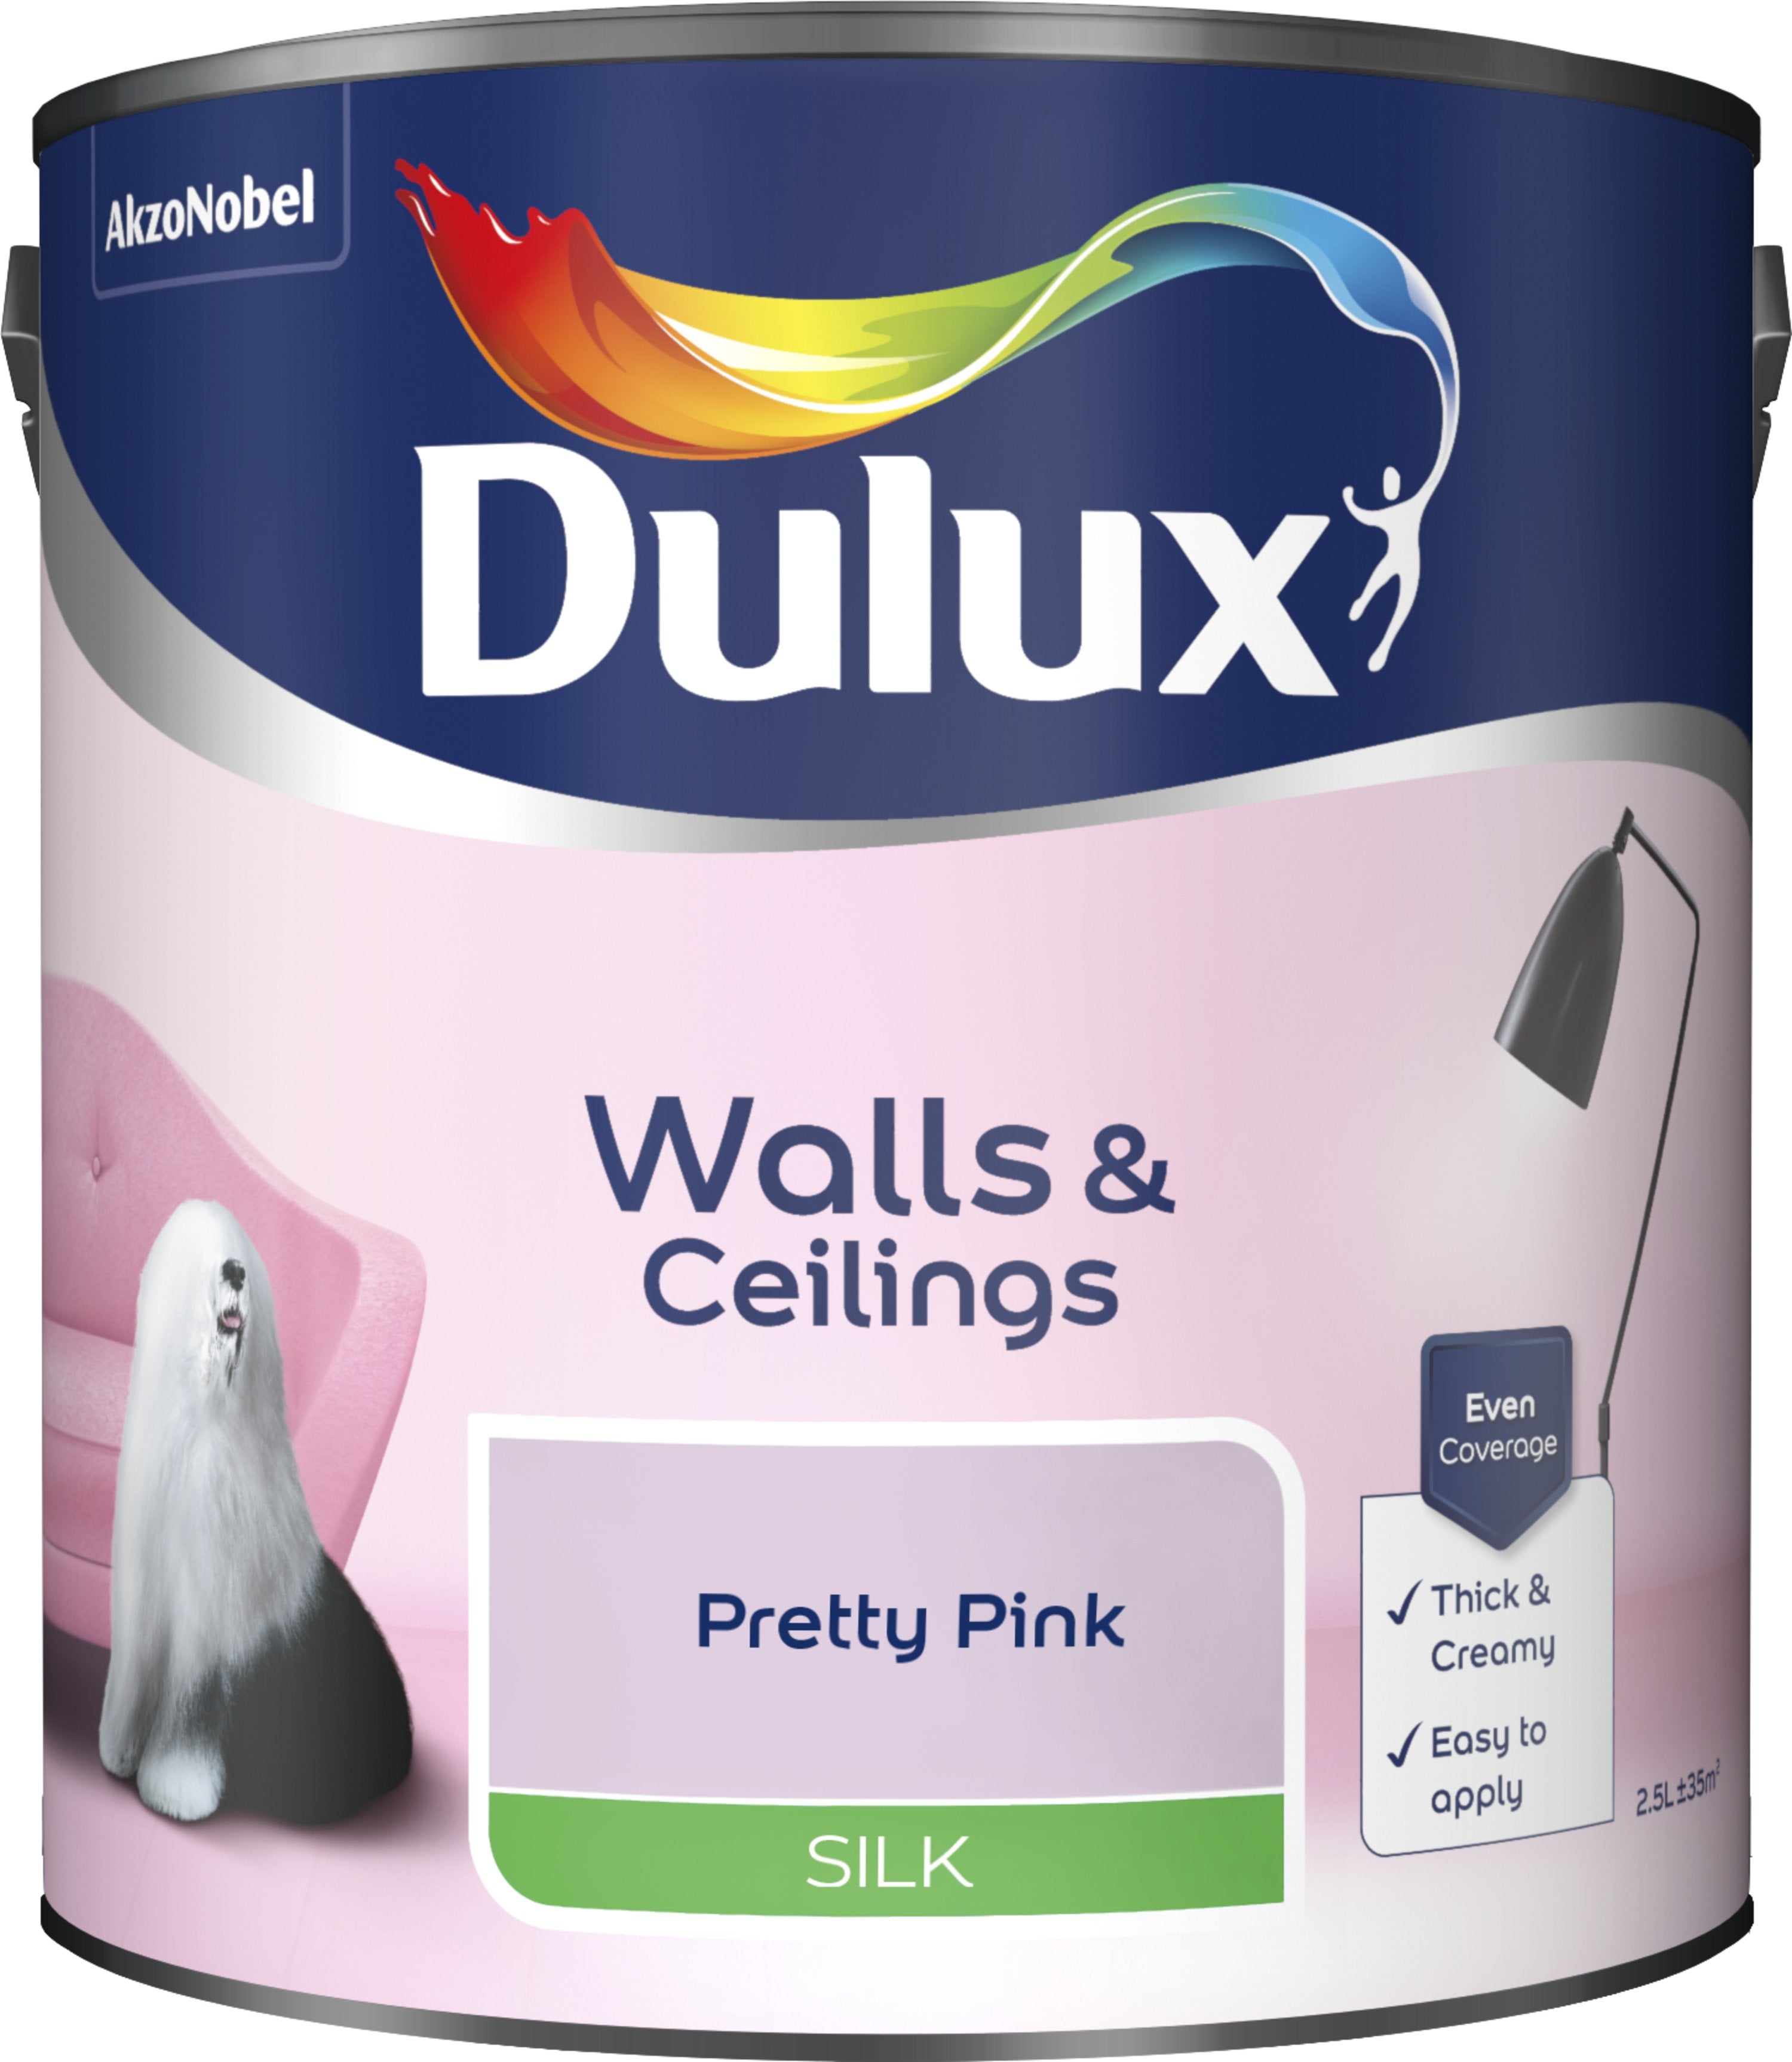 Dulux Silk Emulsion Paint For Walls And Ceilings - Pretty Pink 2.5L Garden & Diy  Home Improvements